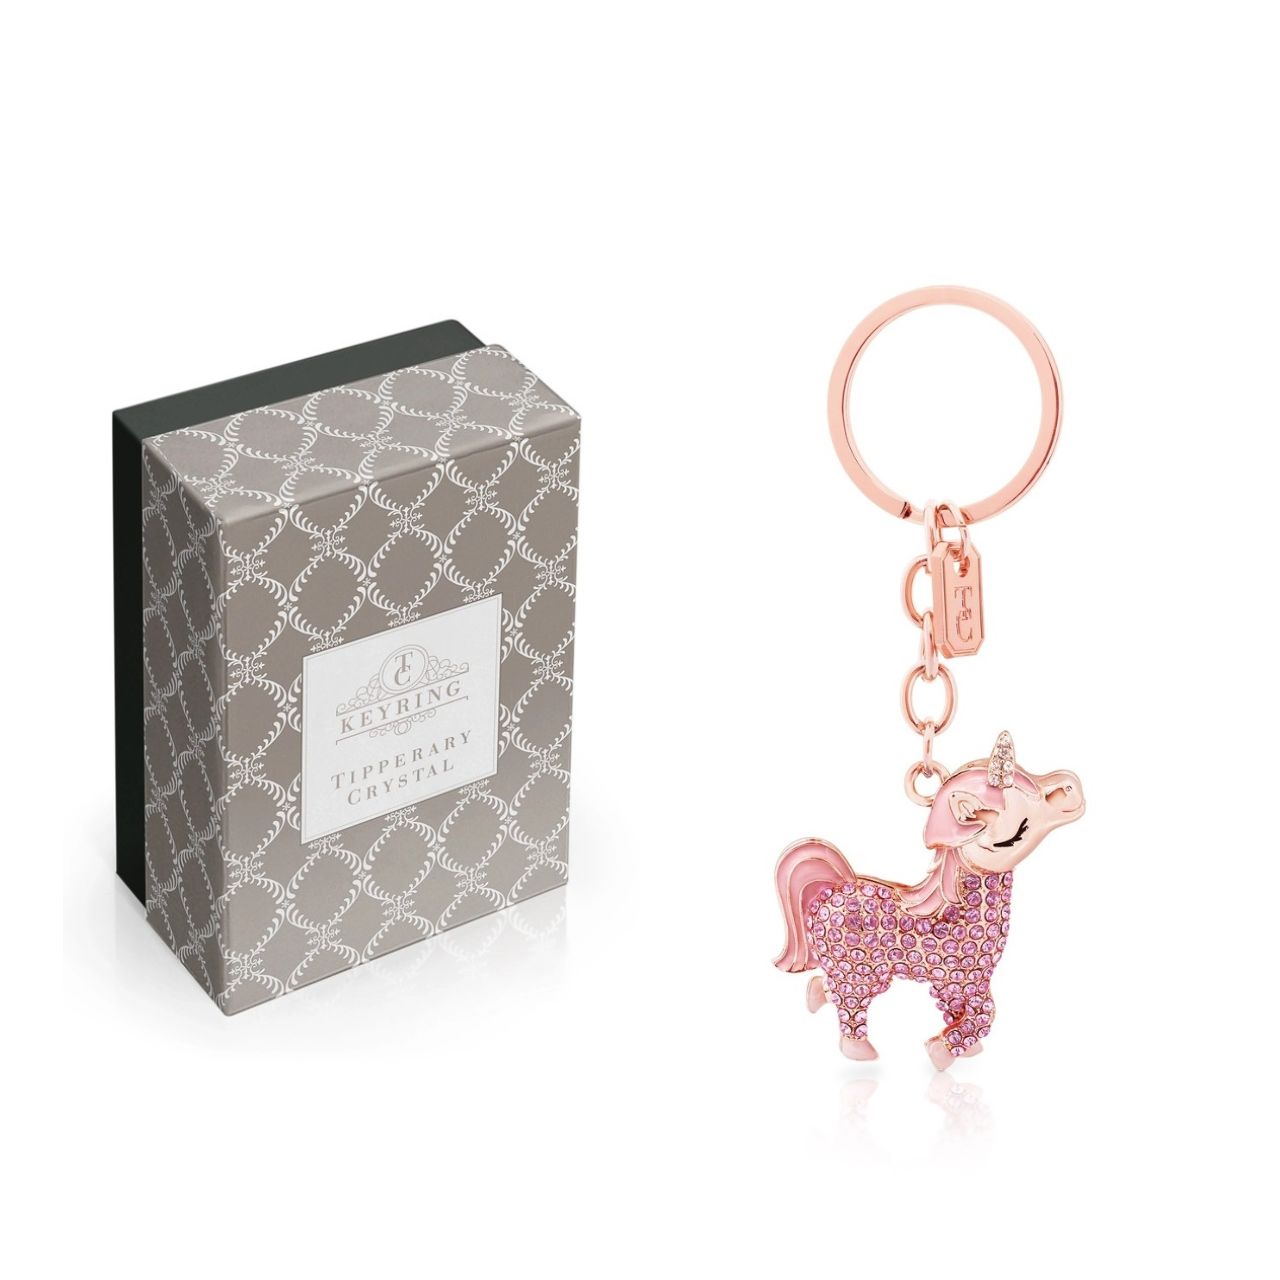 Tipperary Crystal Pink Unicorn Keyring  Transform your keys to a fashion statement with this cute pink unicorn on the end of a keyring.